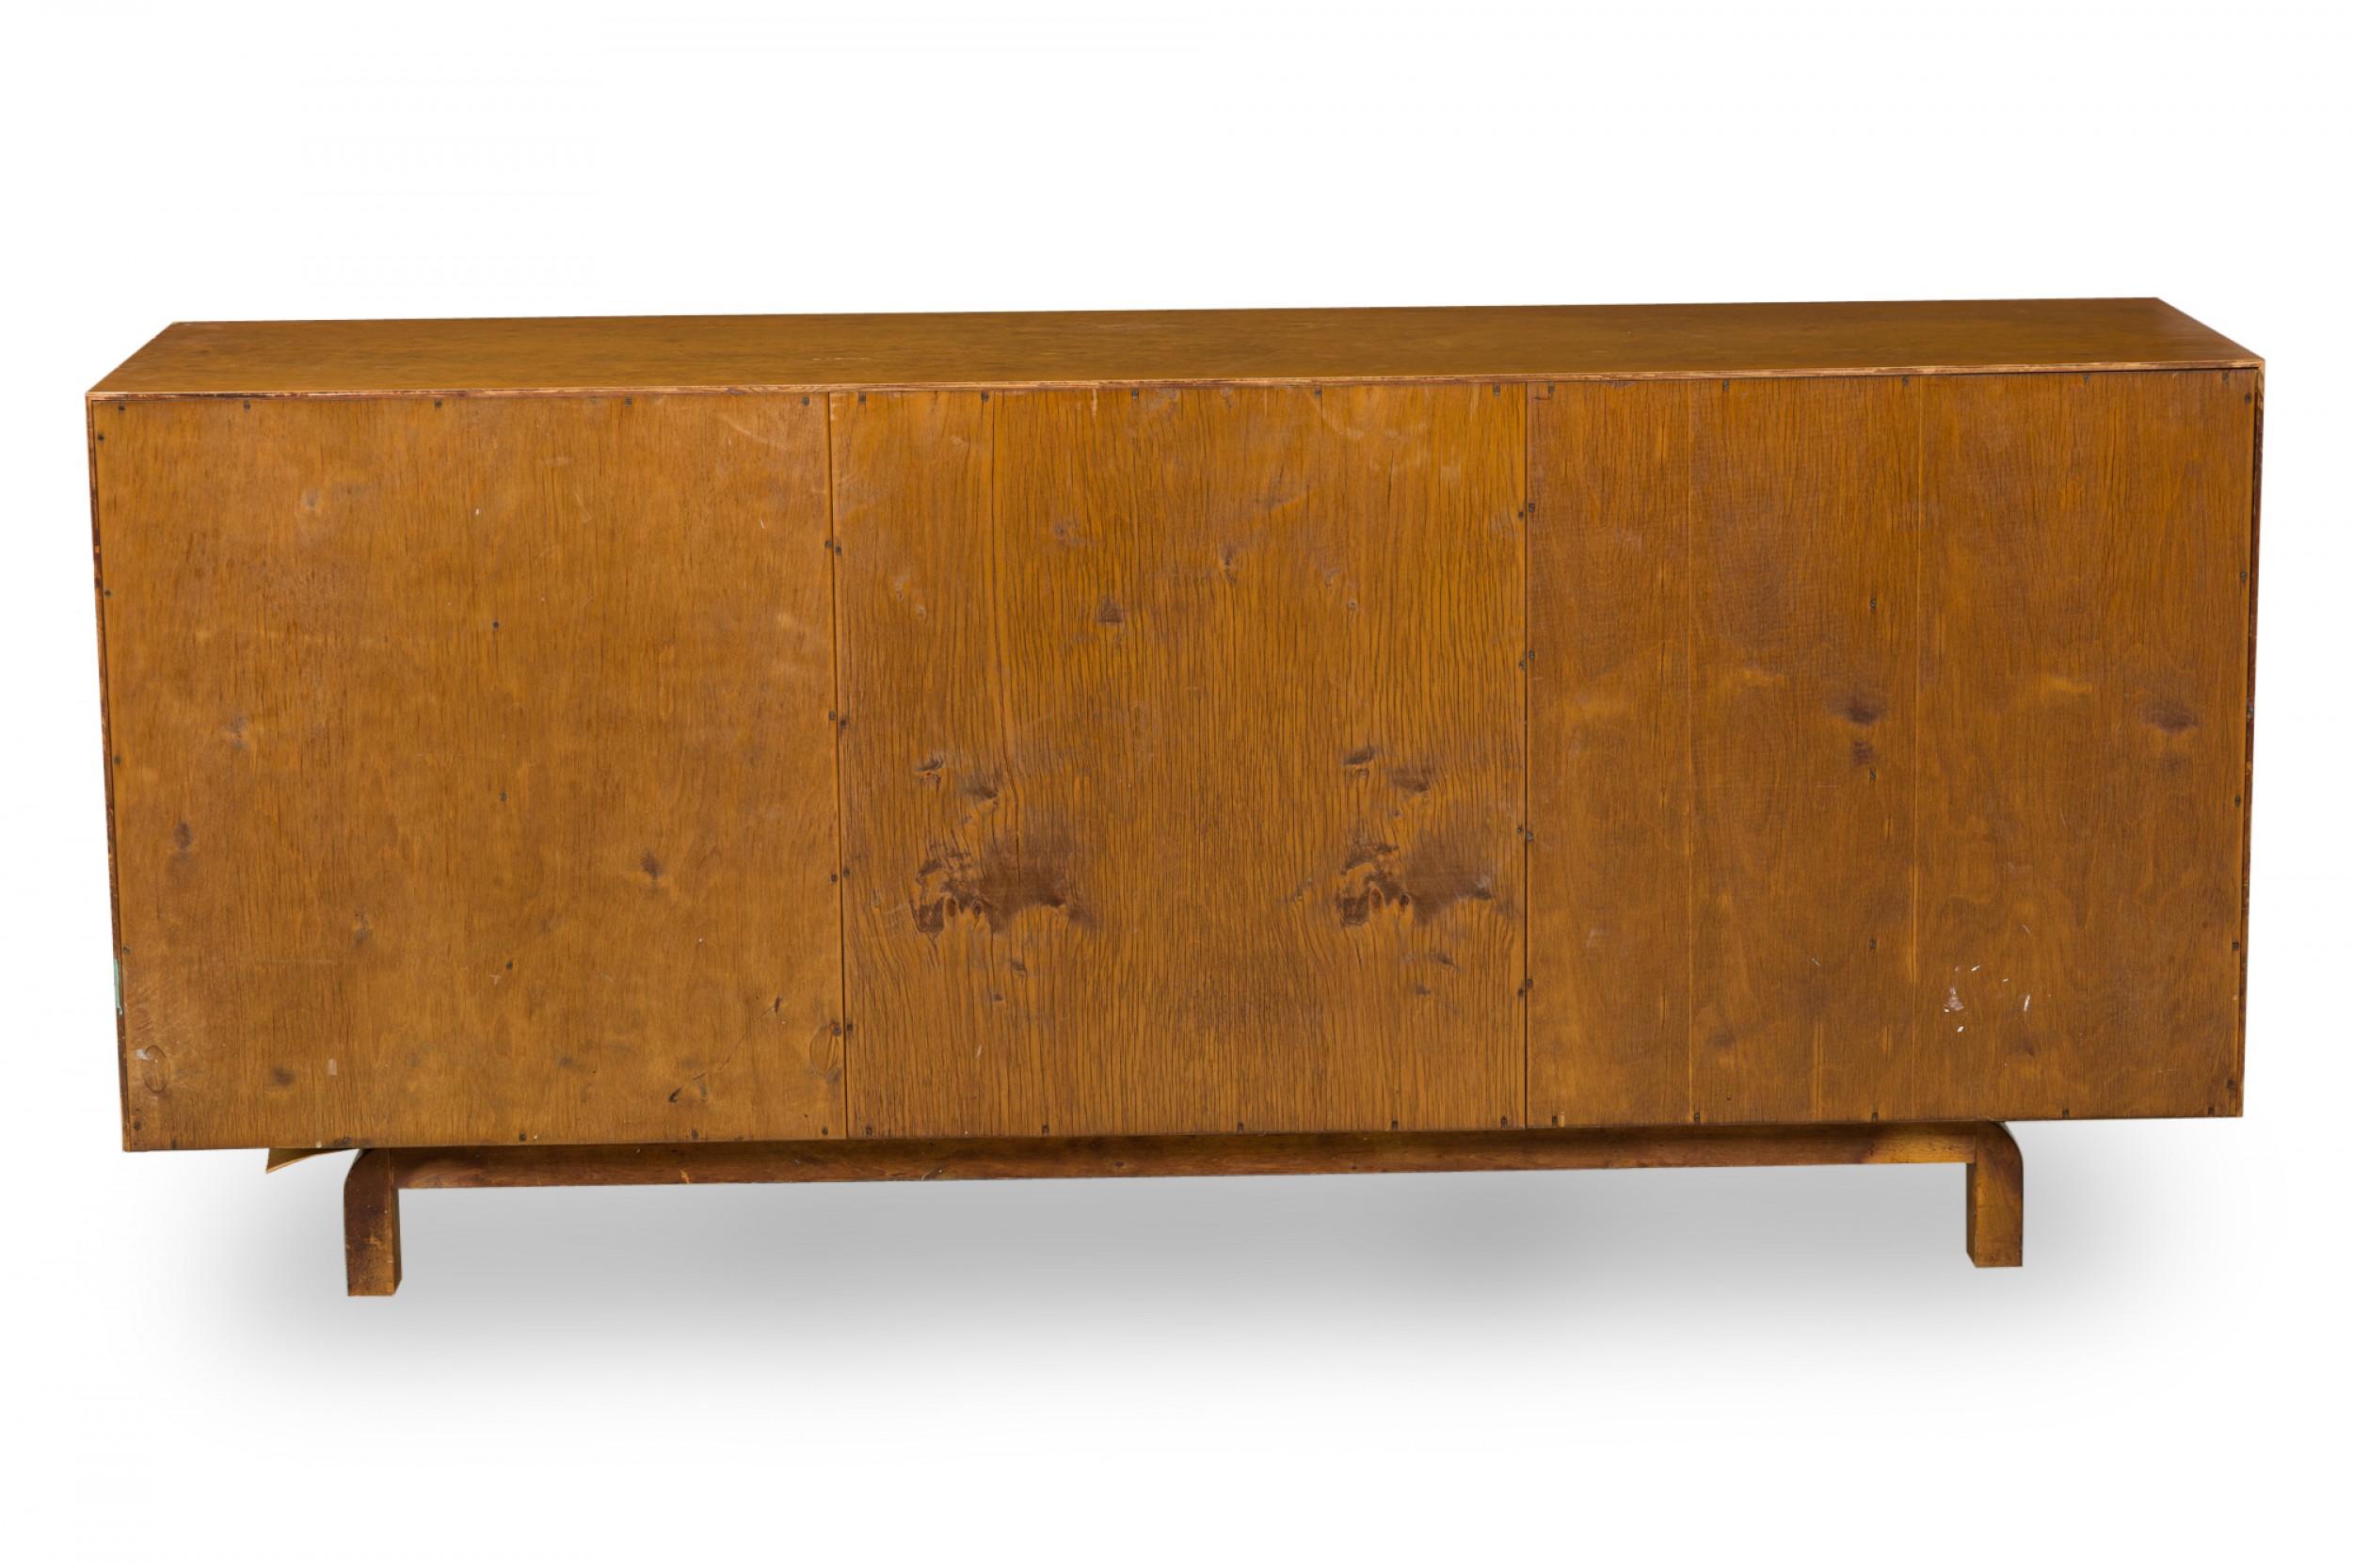 Eero Saarinen Finnish Modern Inlaid Birch and Maple Sideboard Dresser In Good Condition For Sale In New York, NY